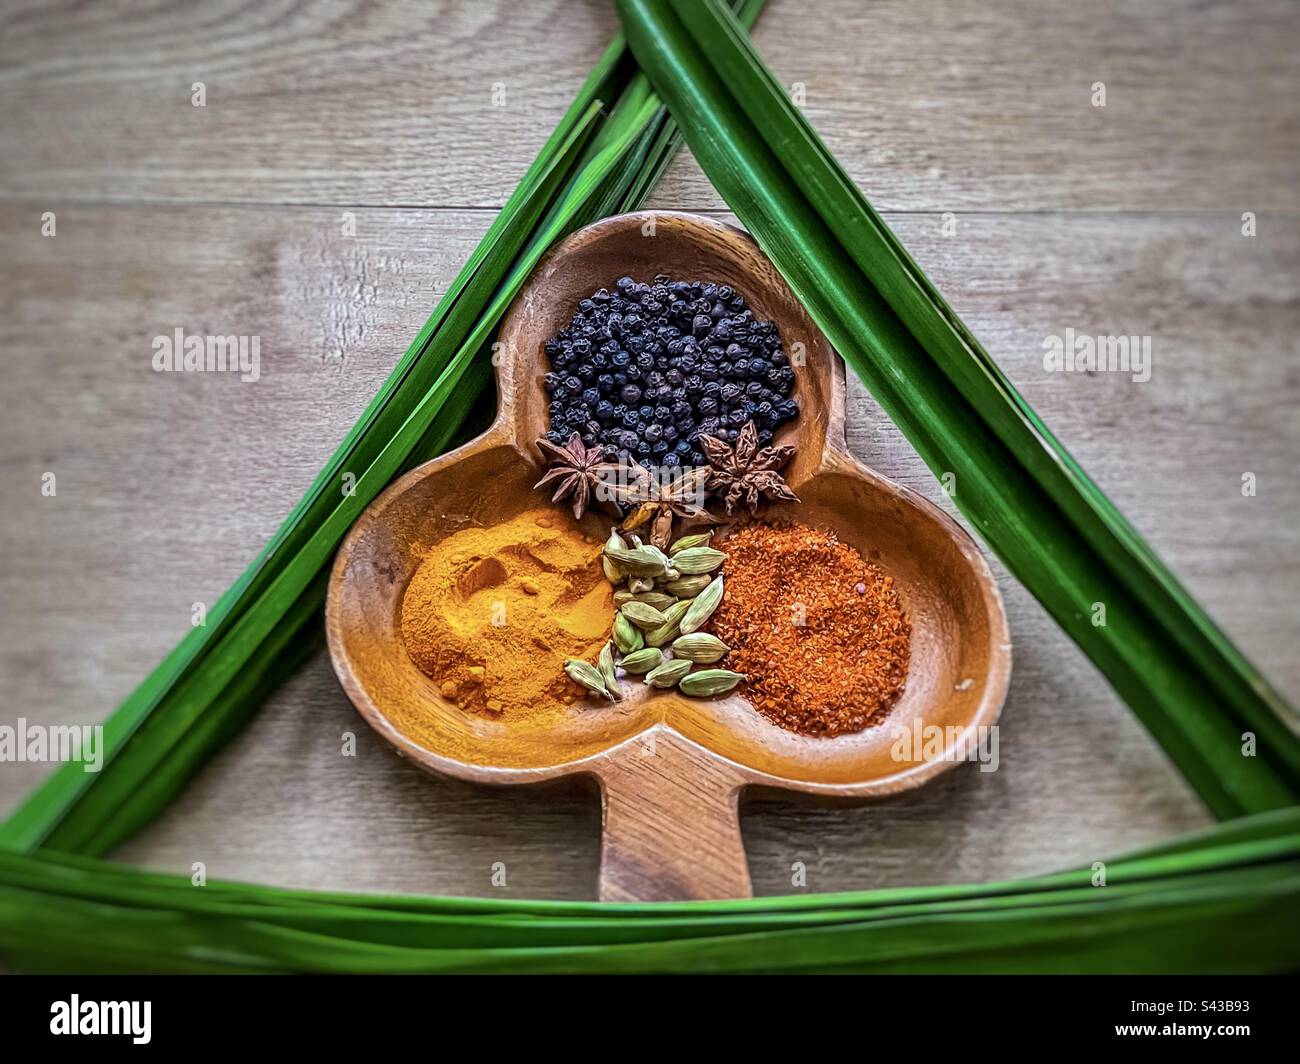 Flat lay of colorful spices arranged in decorative wooden bowl framed by green pandanus leaves also known as pandan or screw palm leaves on wooden table. Stock Photo